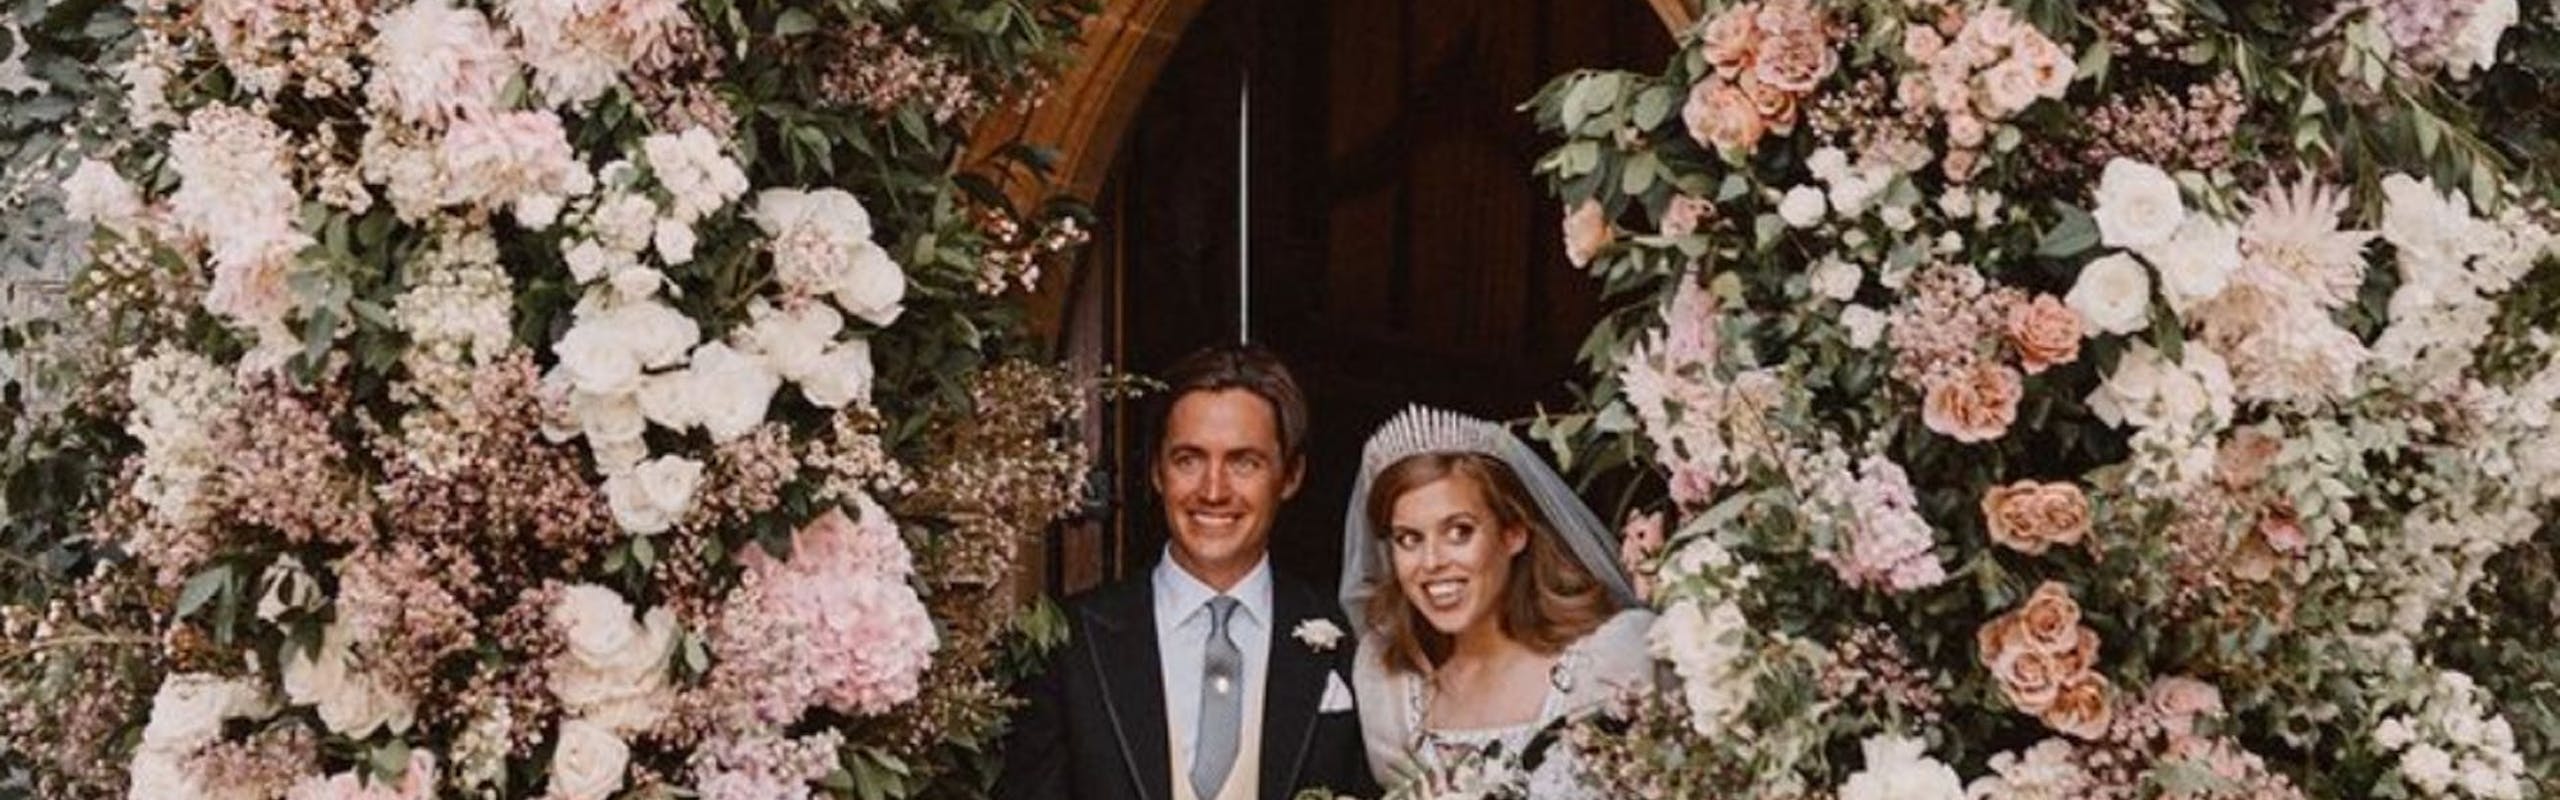 Princess Beatrice wearing the Queen Mary Fringe Tiara at her wedding ceremony